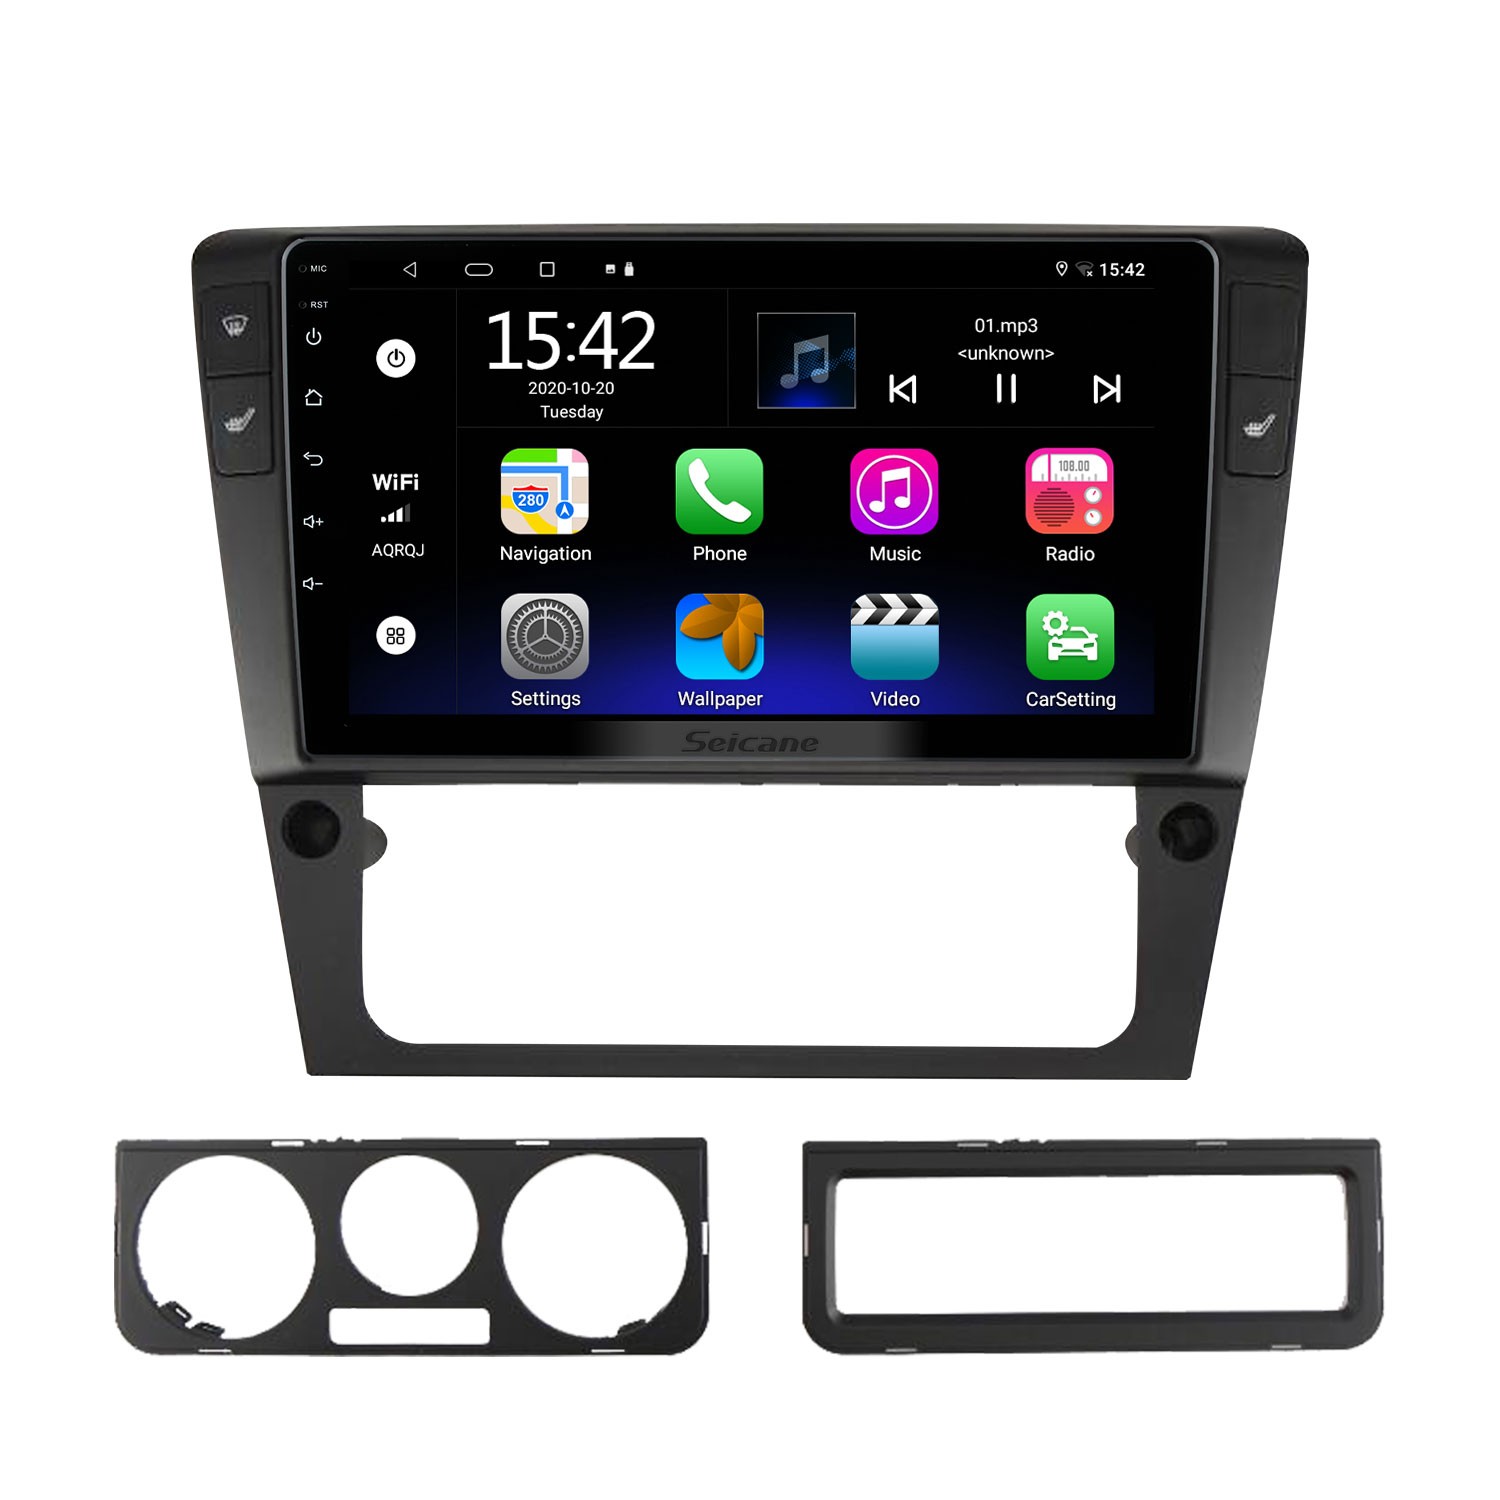 https://www.seicane.com/media/catalog/product/cache/1/image/9df78eab33525d08d6e5fb8d27136e95/9/-/9-inch-android-10-0-for-2006-volkswagen-passat-b6-stereo-gps-navigation-system-with-bluetooth-obd2-dvr-tpms-rearview-camera-in-dash-gps-stereo-1_2.jpg